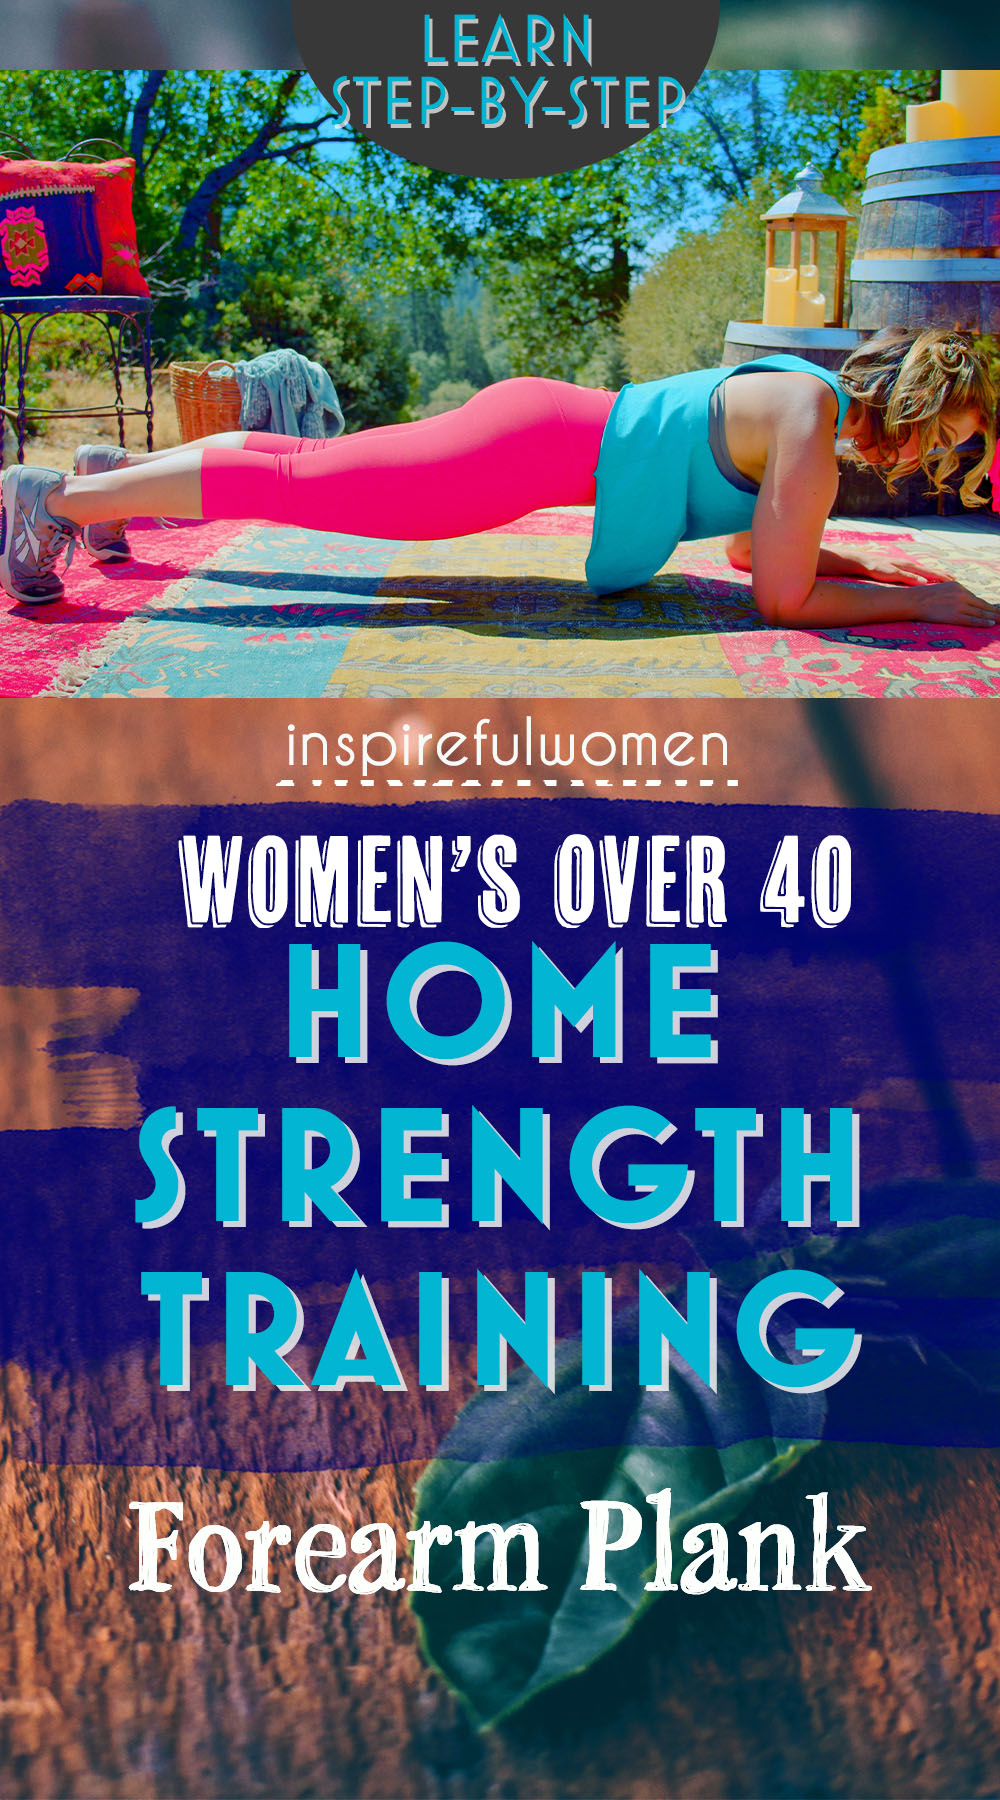 forearm-plank-variation-beginner-bodyweight-ab-core-toning-exercise-at-home-women-40-plus